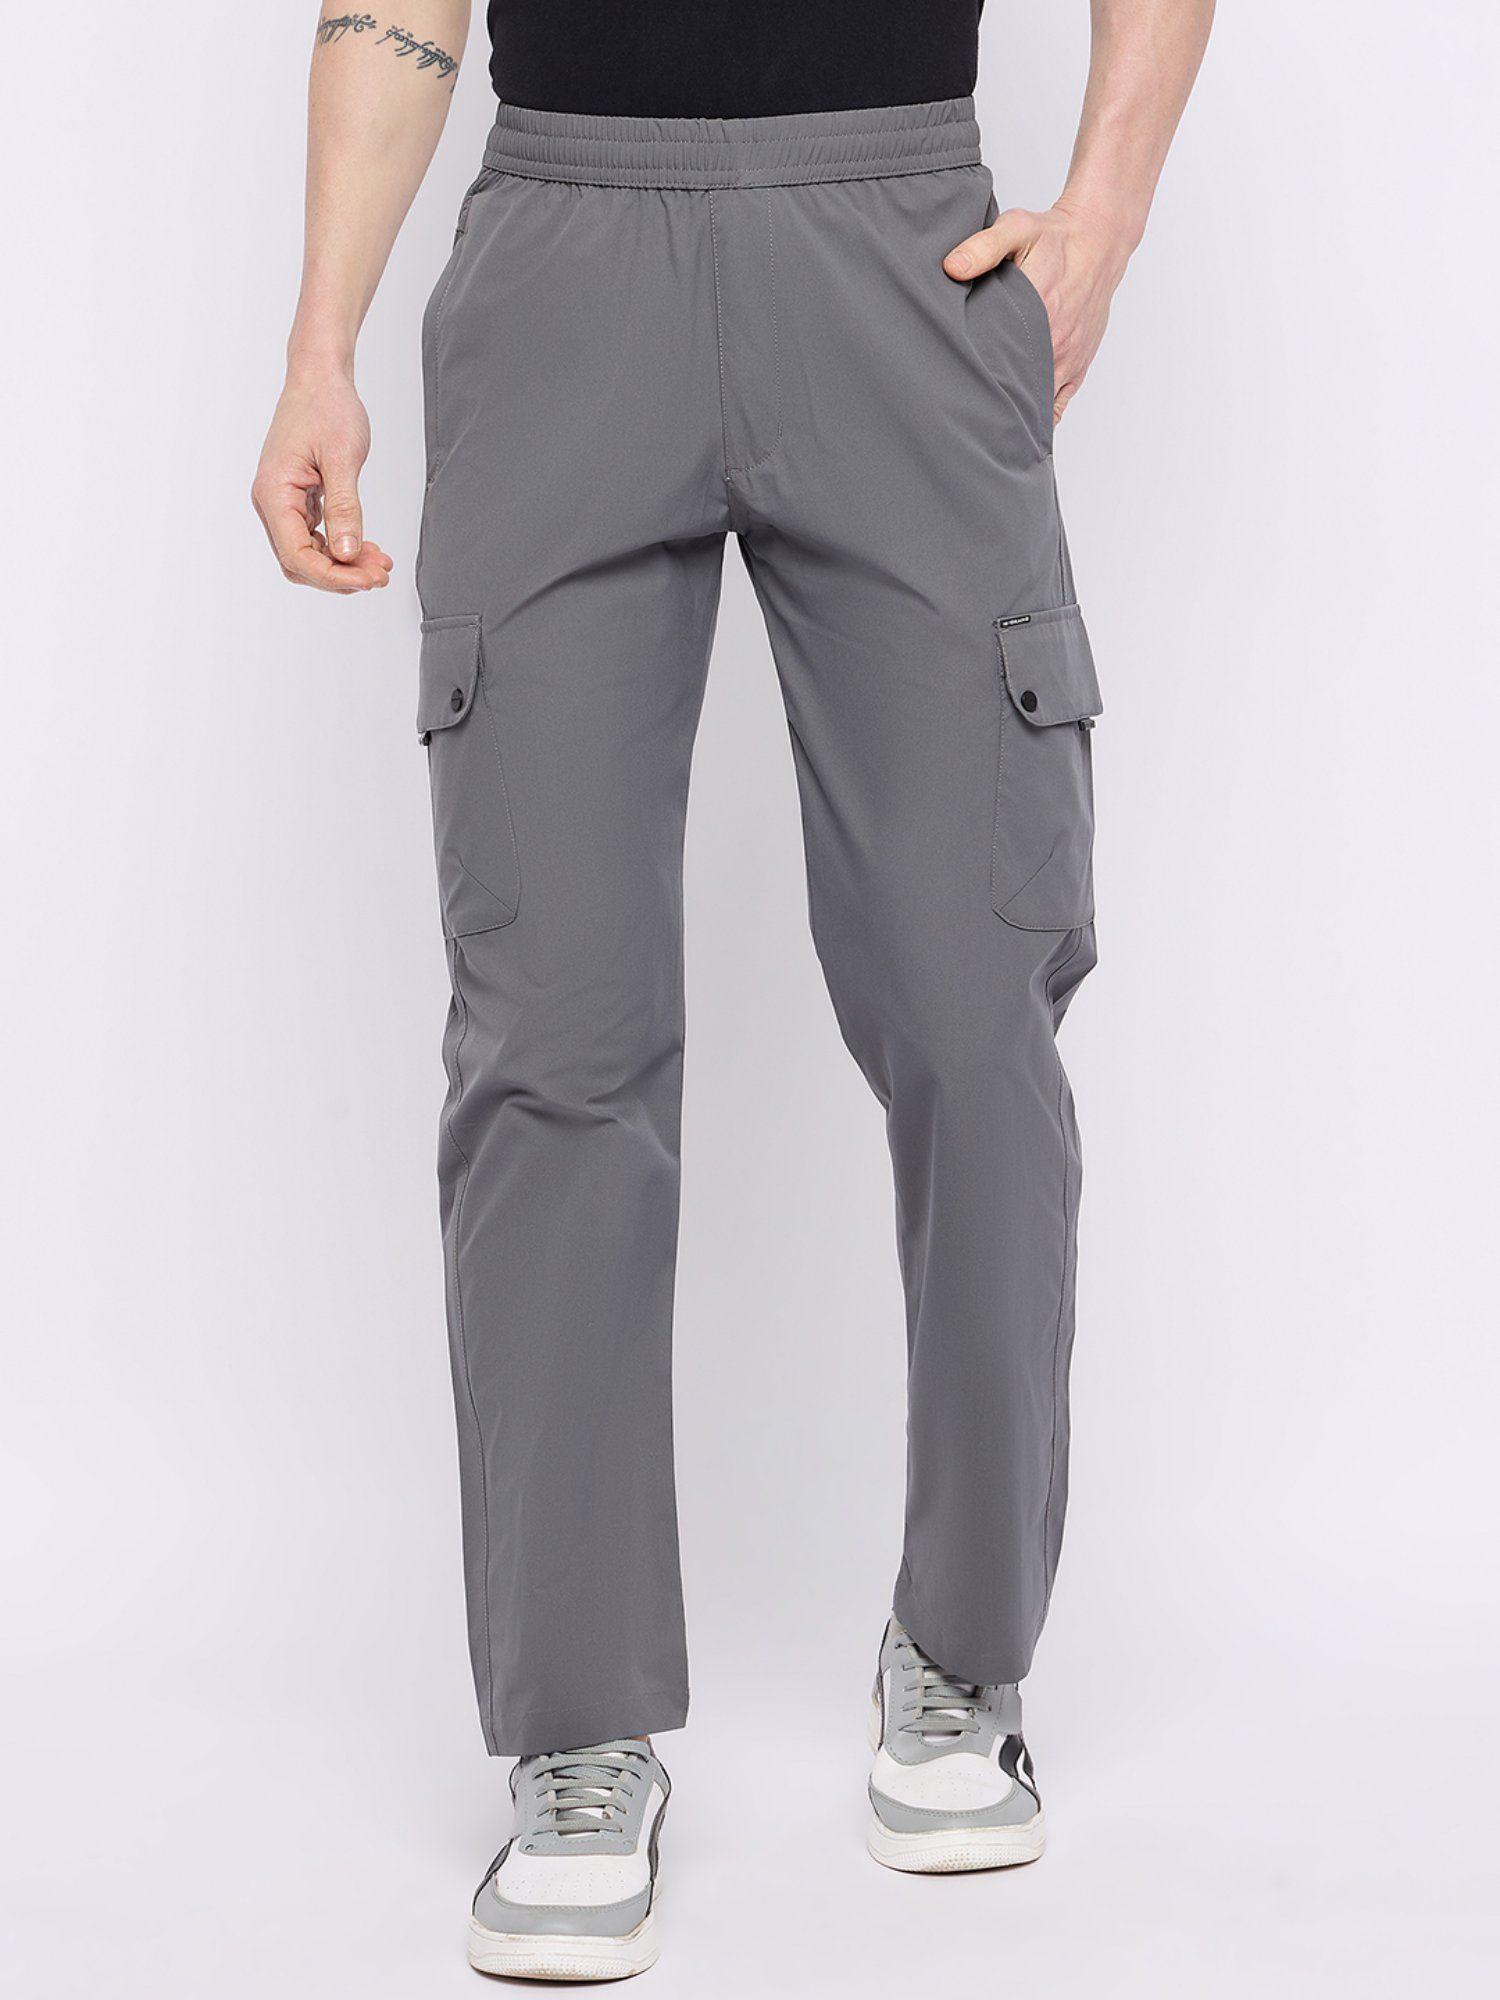 grey-polyester-track-pants